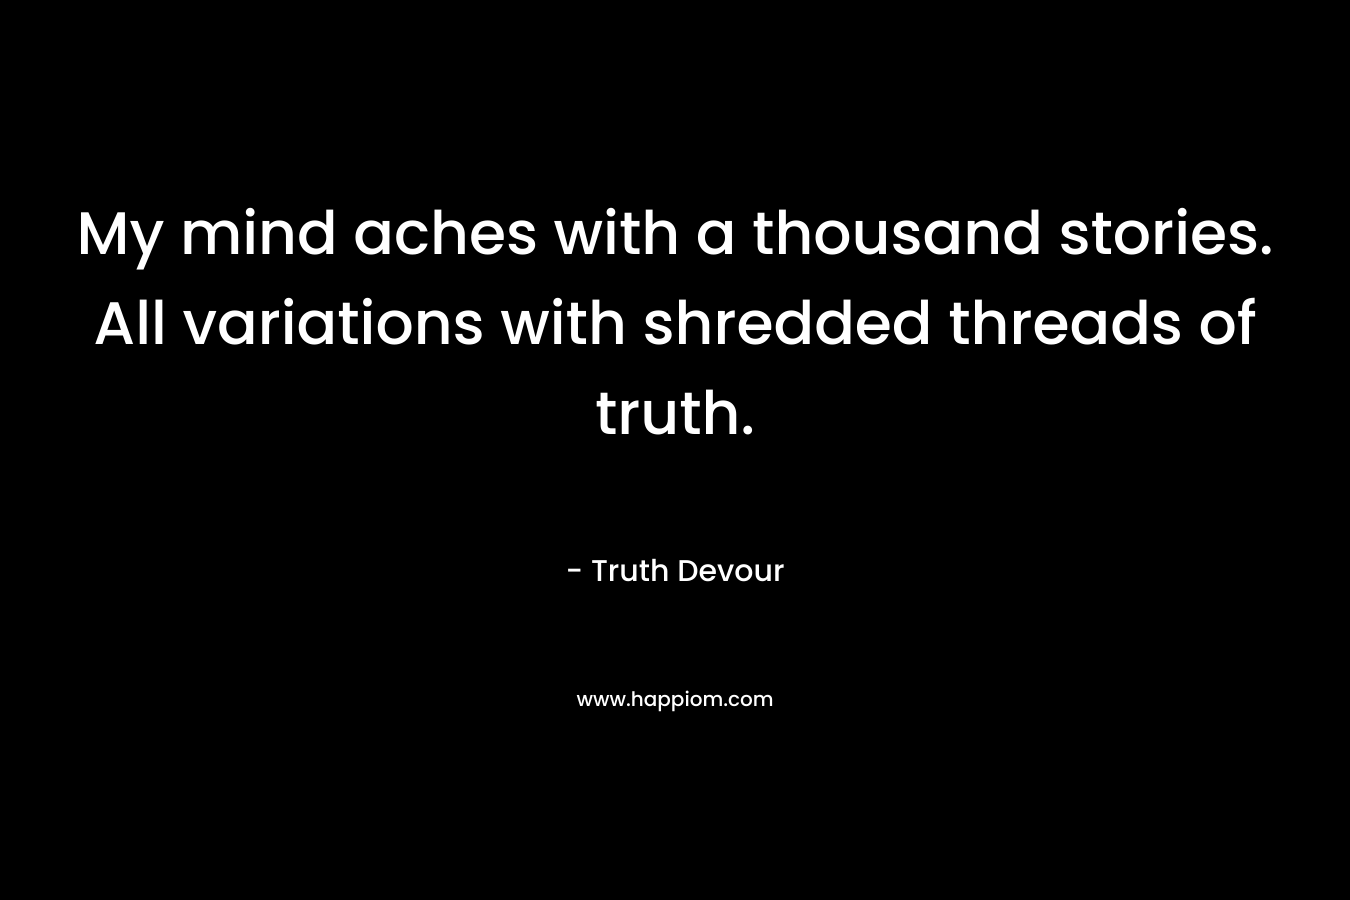 My mind aches with a thousand stories. All variations with shredded threads of truth. – Truth Devour